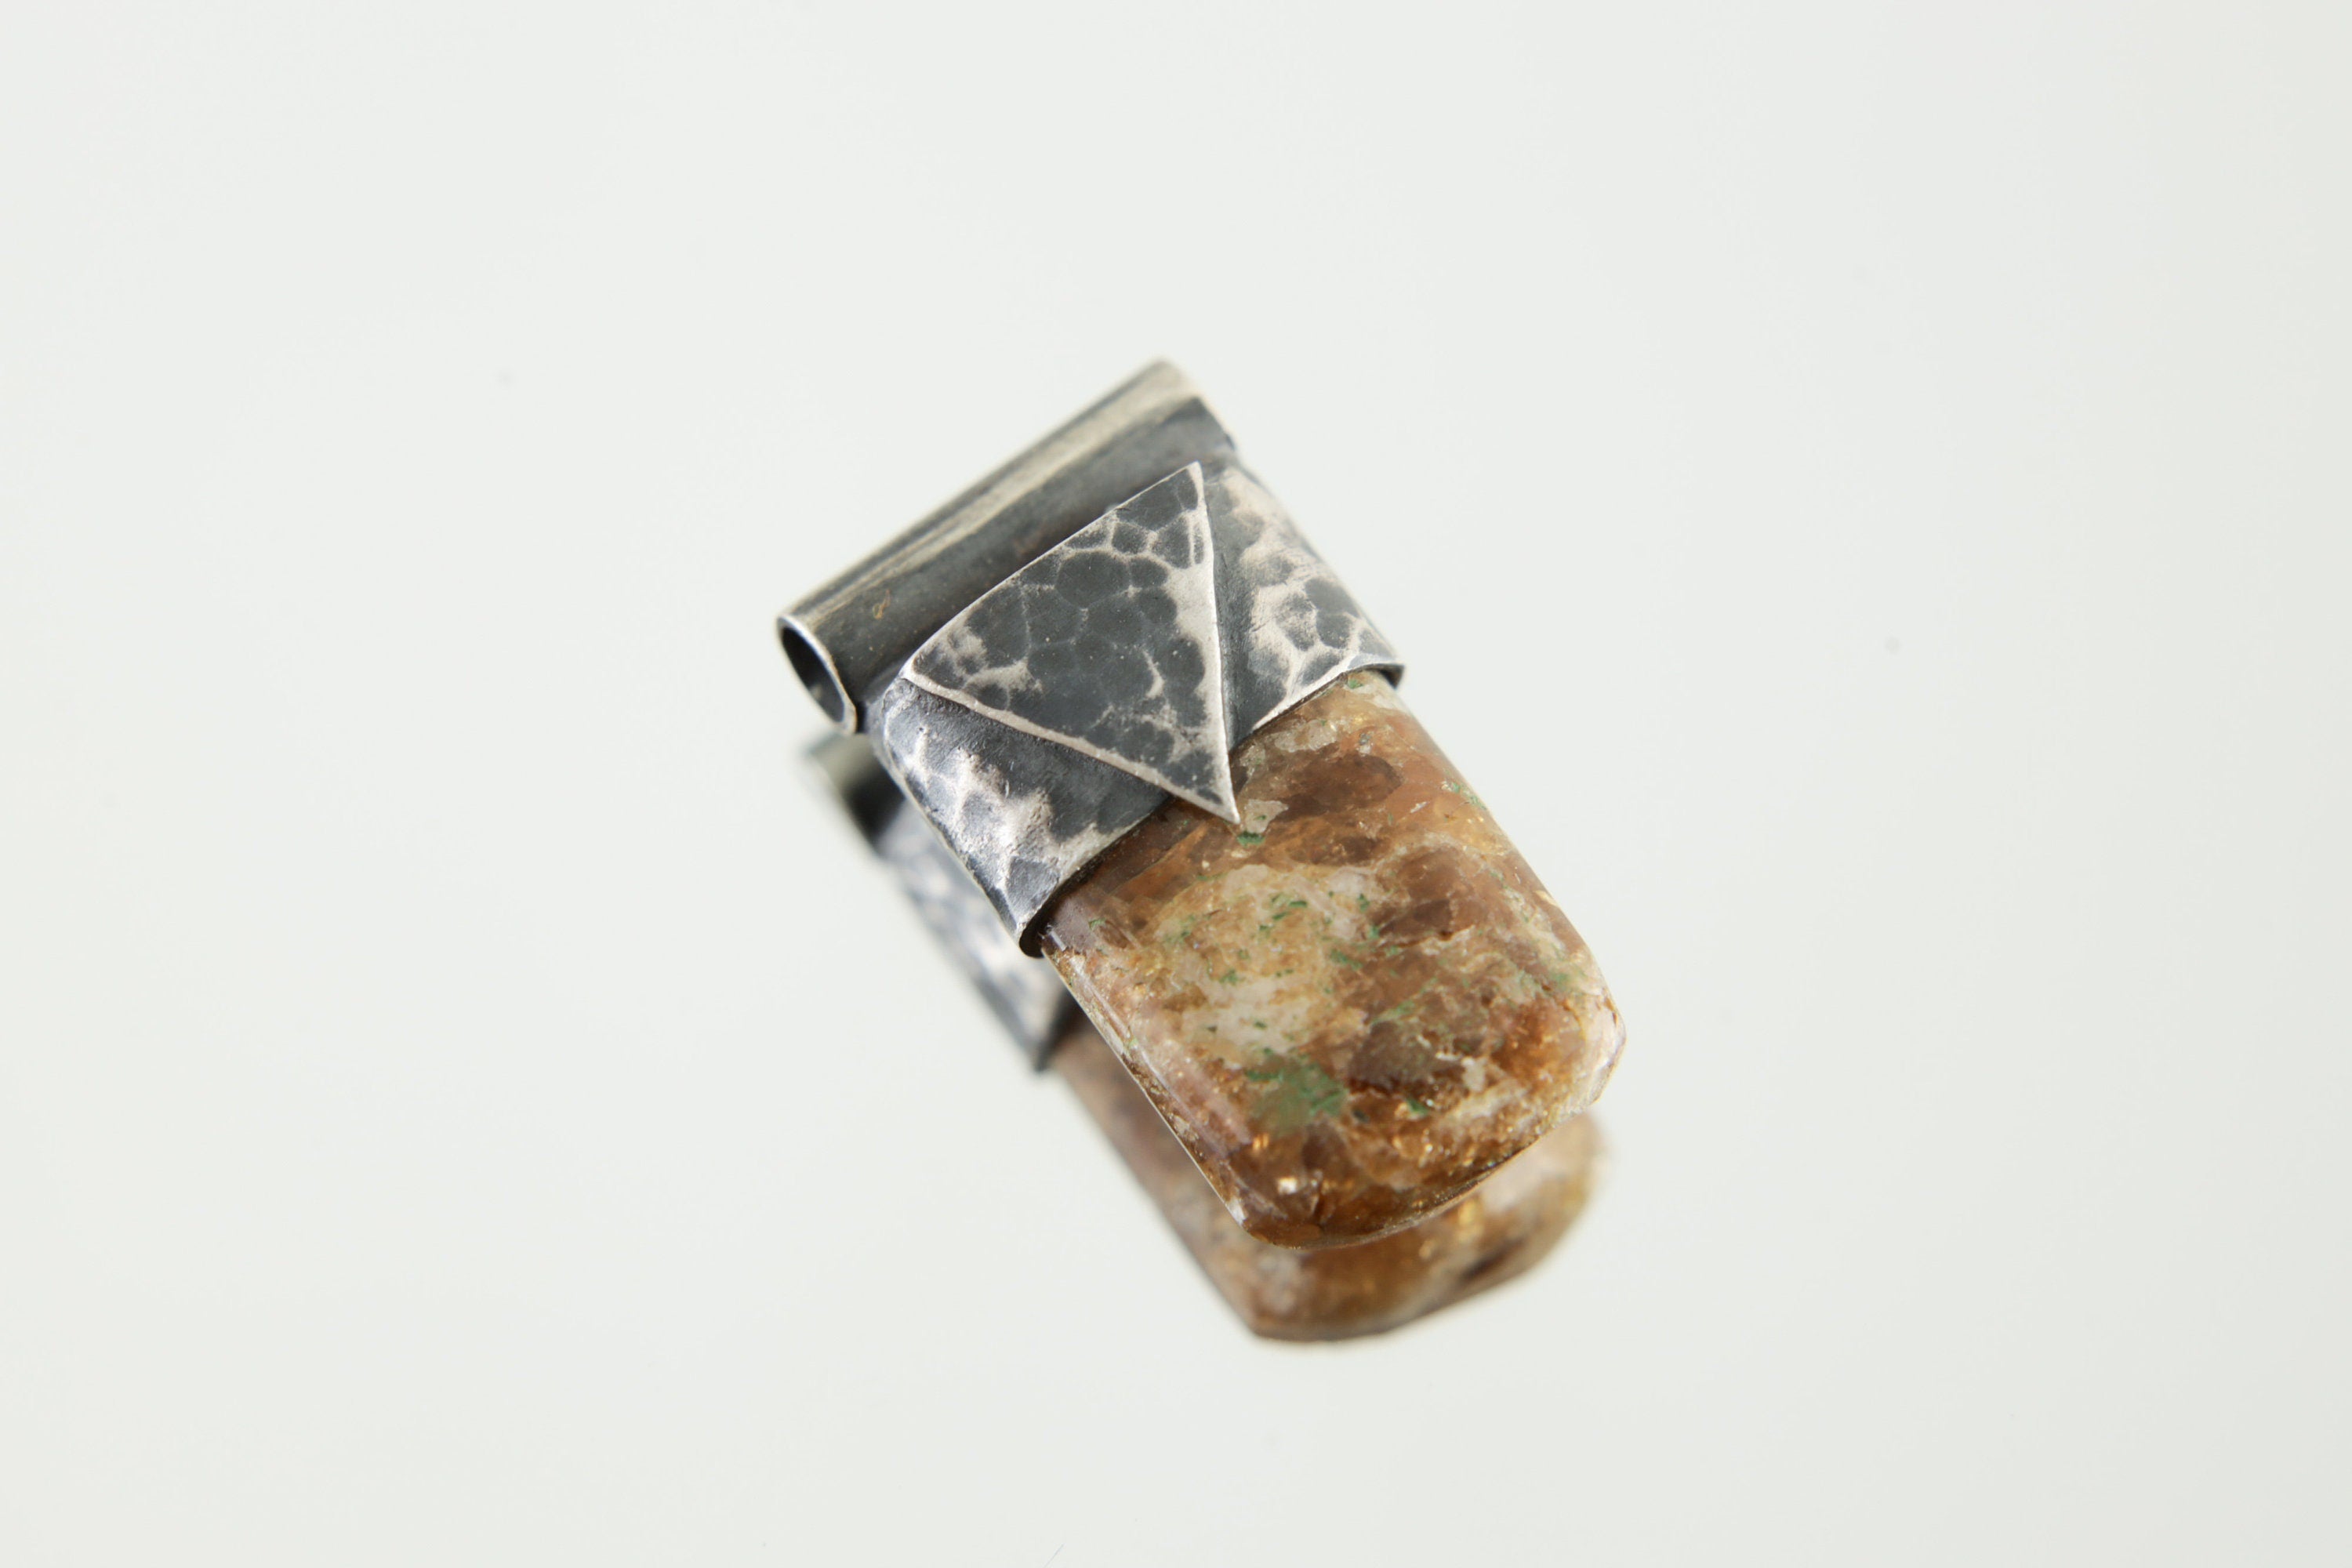 Polished Brown Himalayan Gem Dravite Tourmaline Specimen Pendant Stack Collection Charm Organic Textured Sterling Silver Crystal Necklace